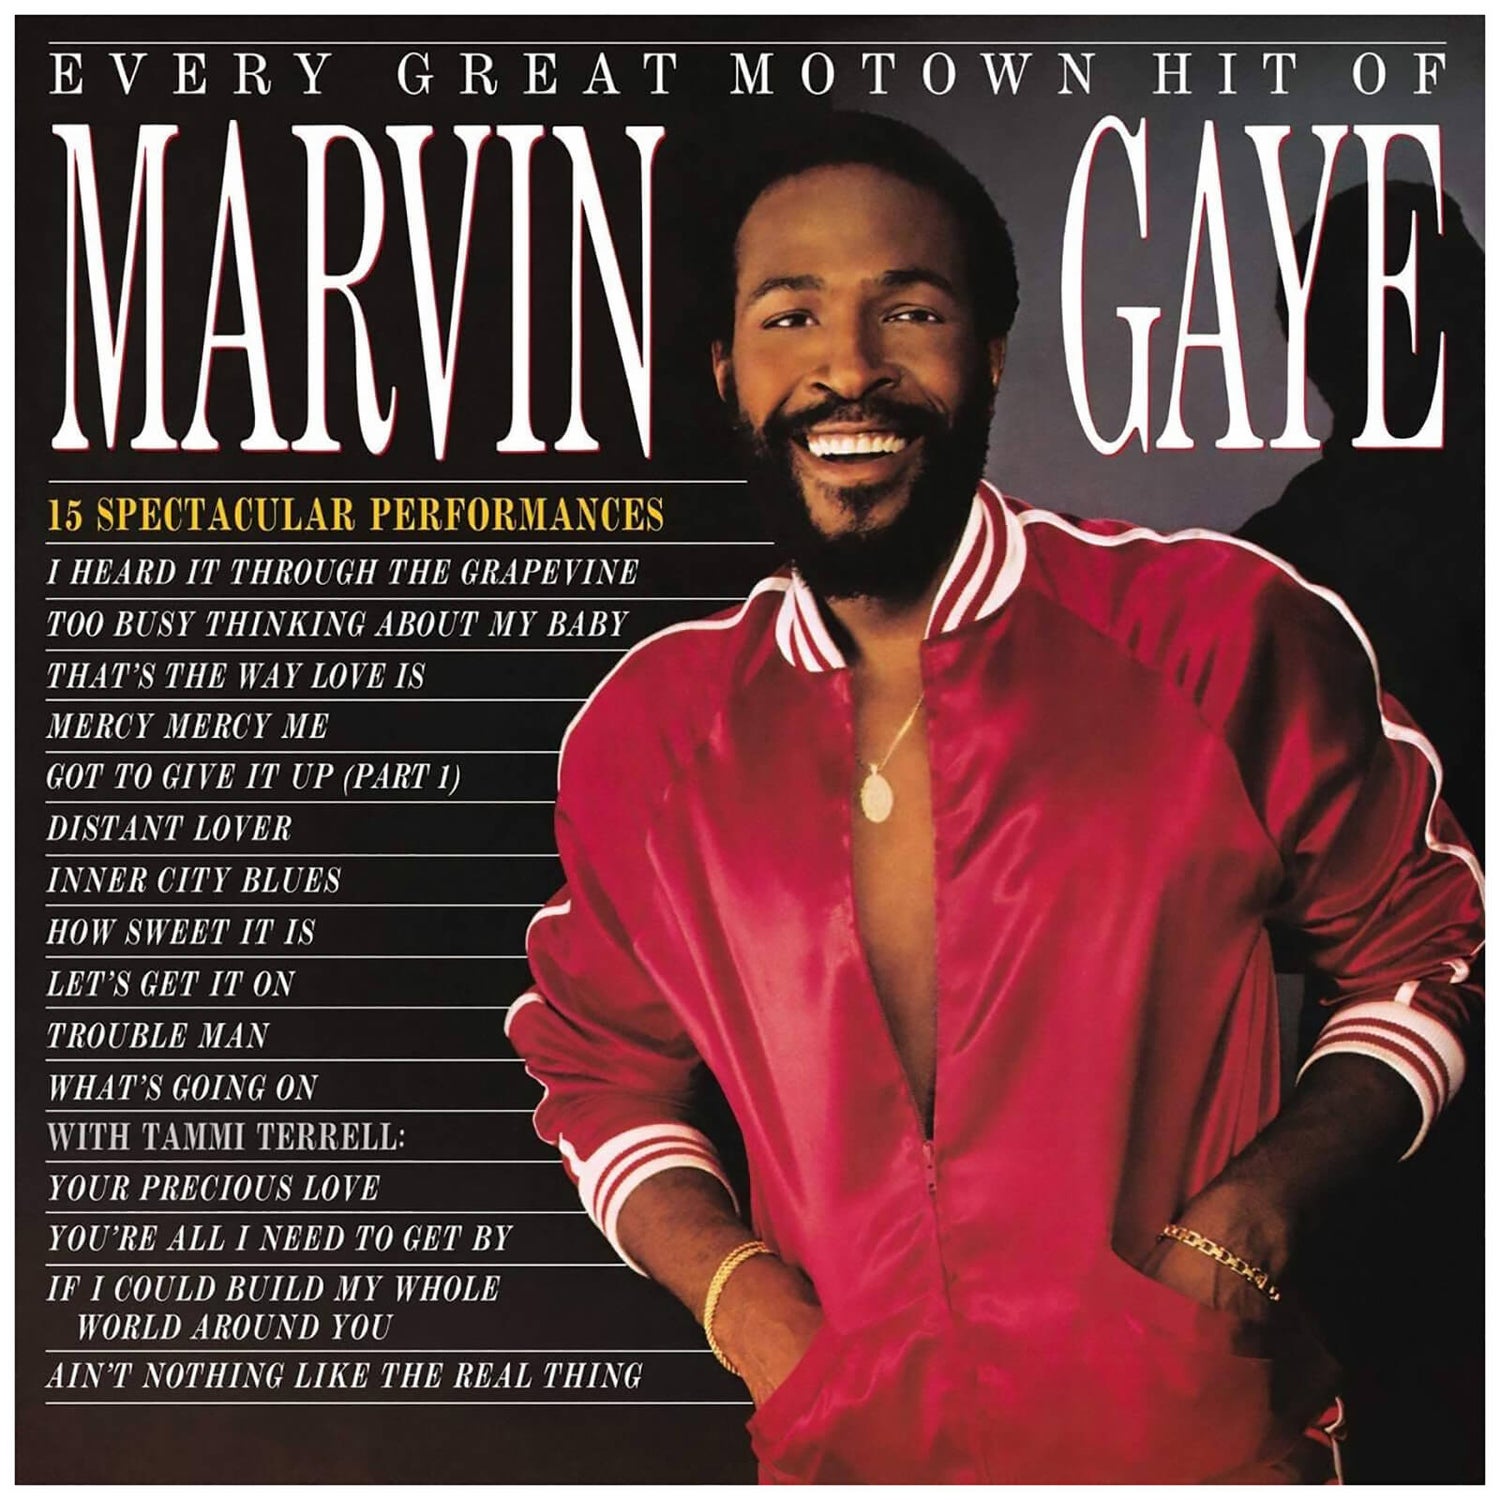 Marvin Gaye - Every Great Motown Hit Of Marvin Gaye: 15 Spectacular Performances Vinyl